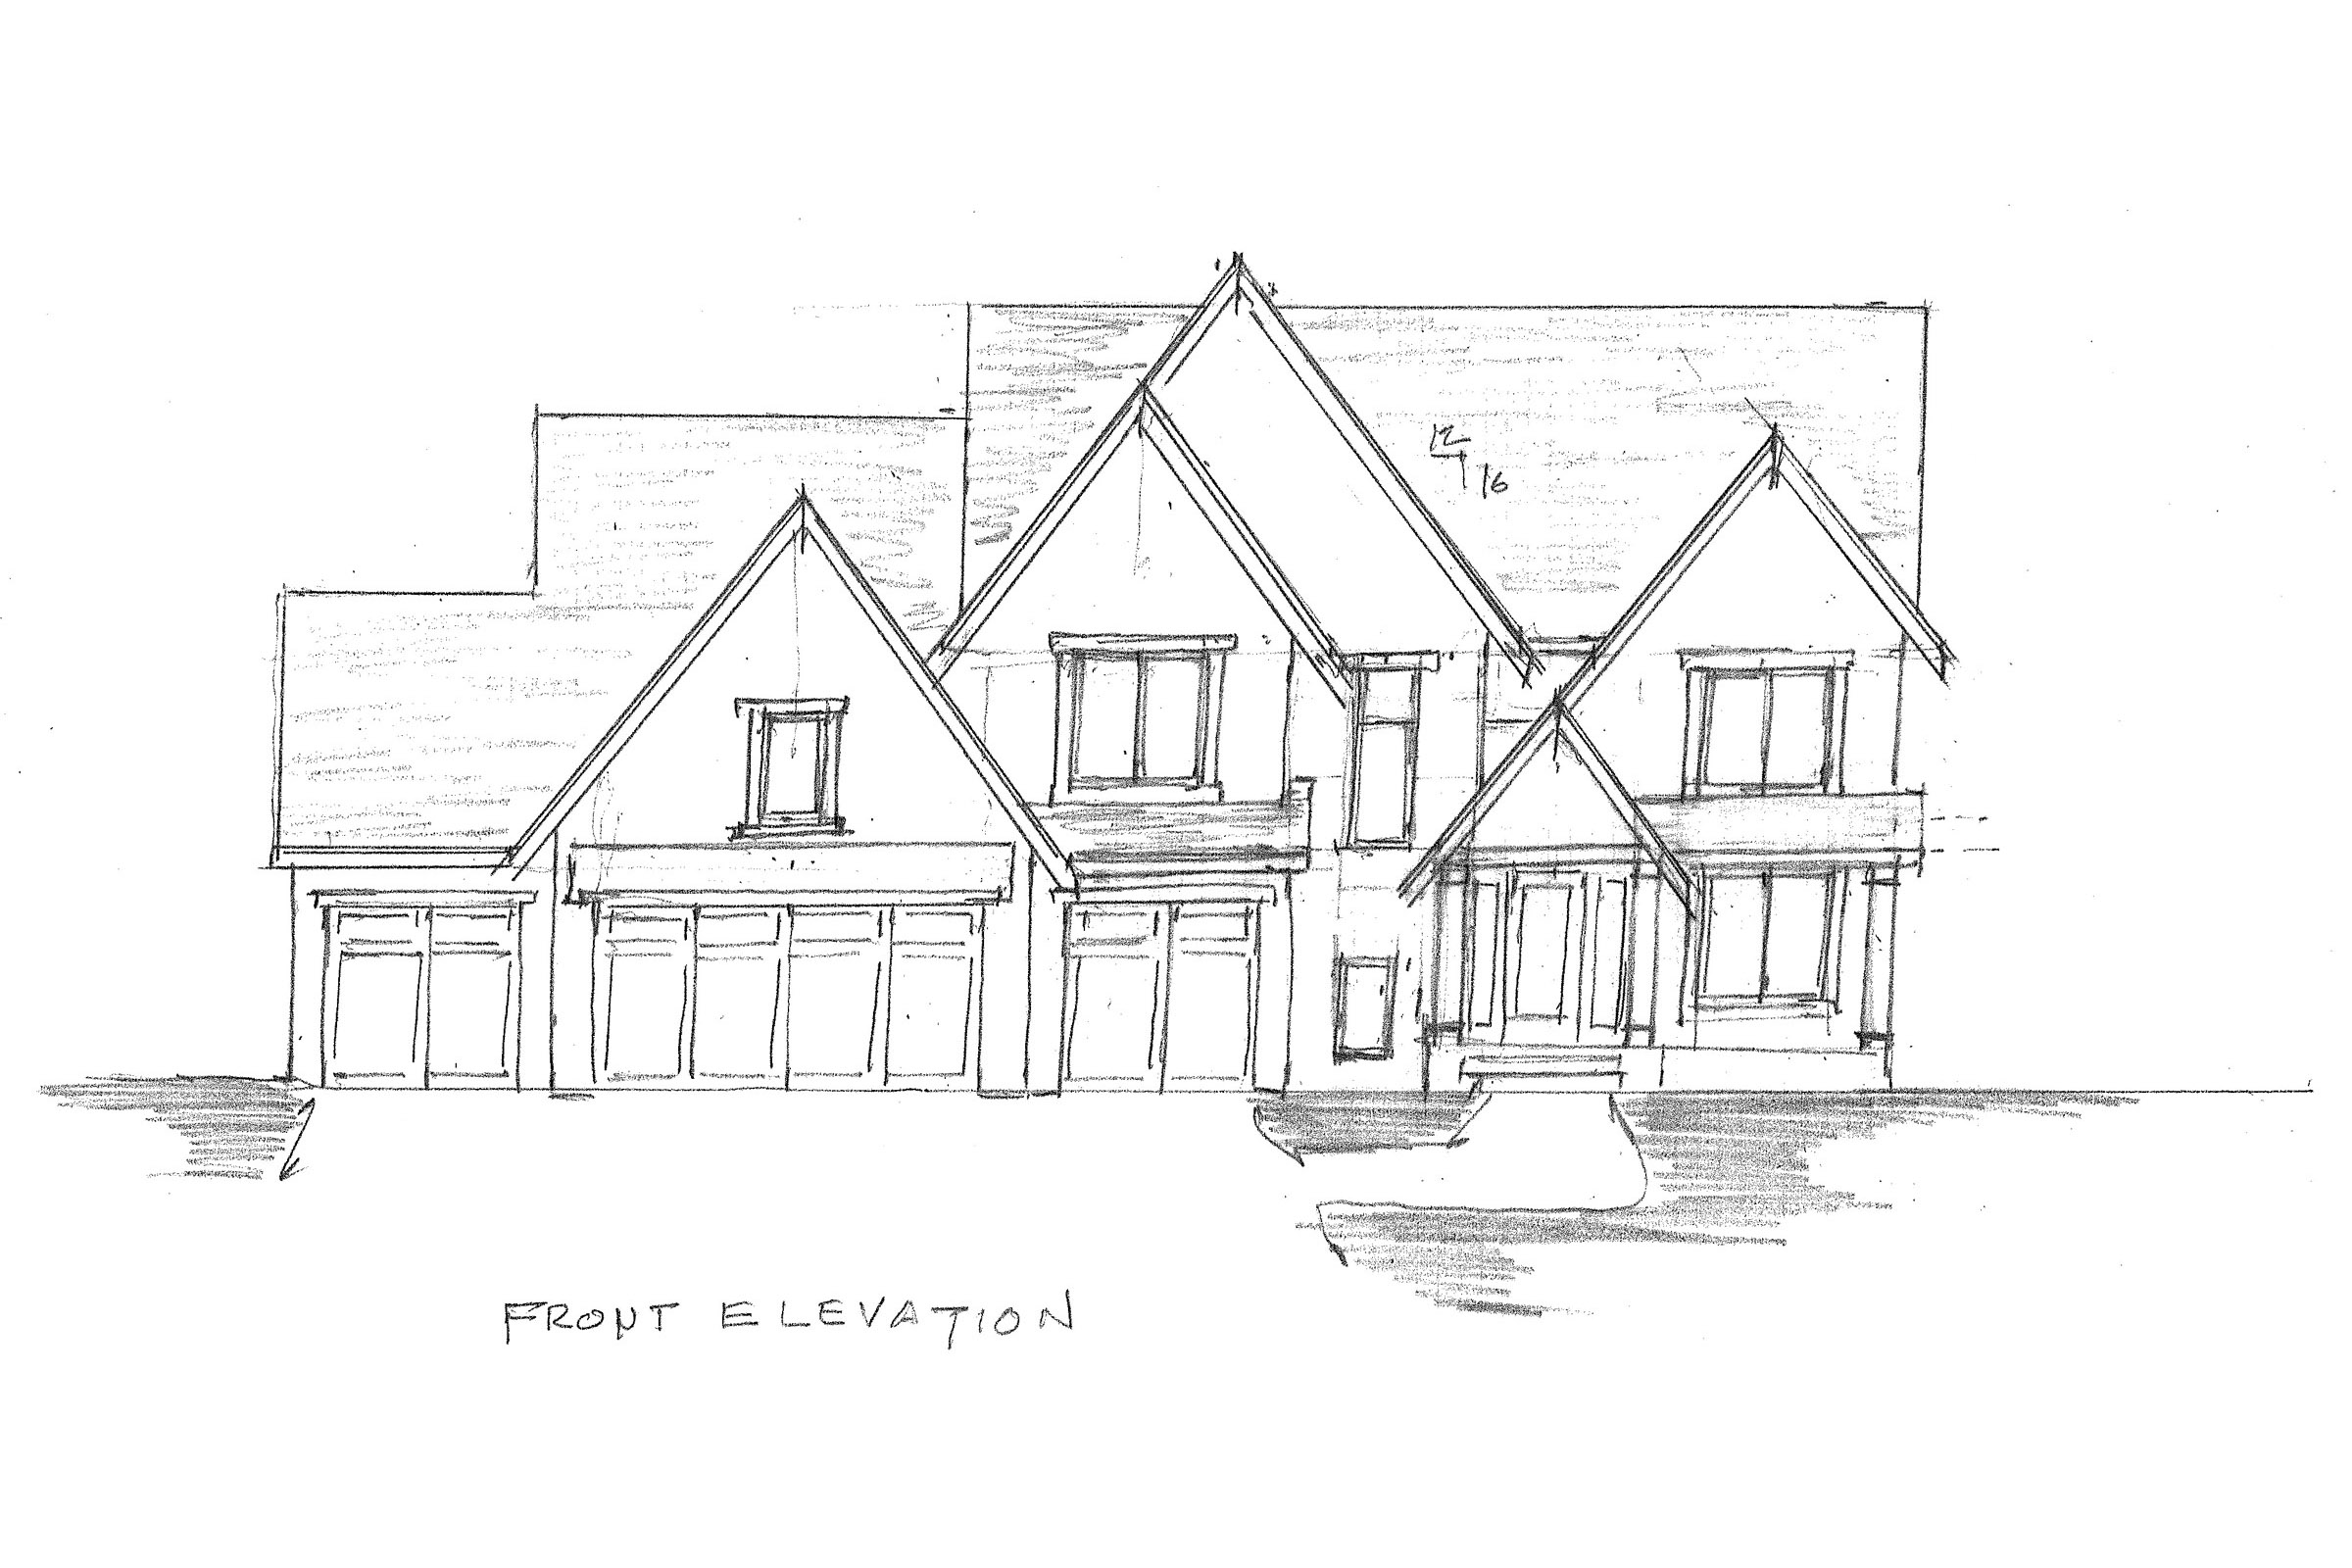 Home Plan Front